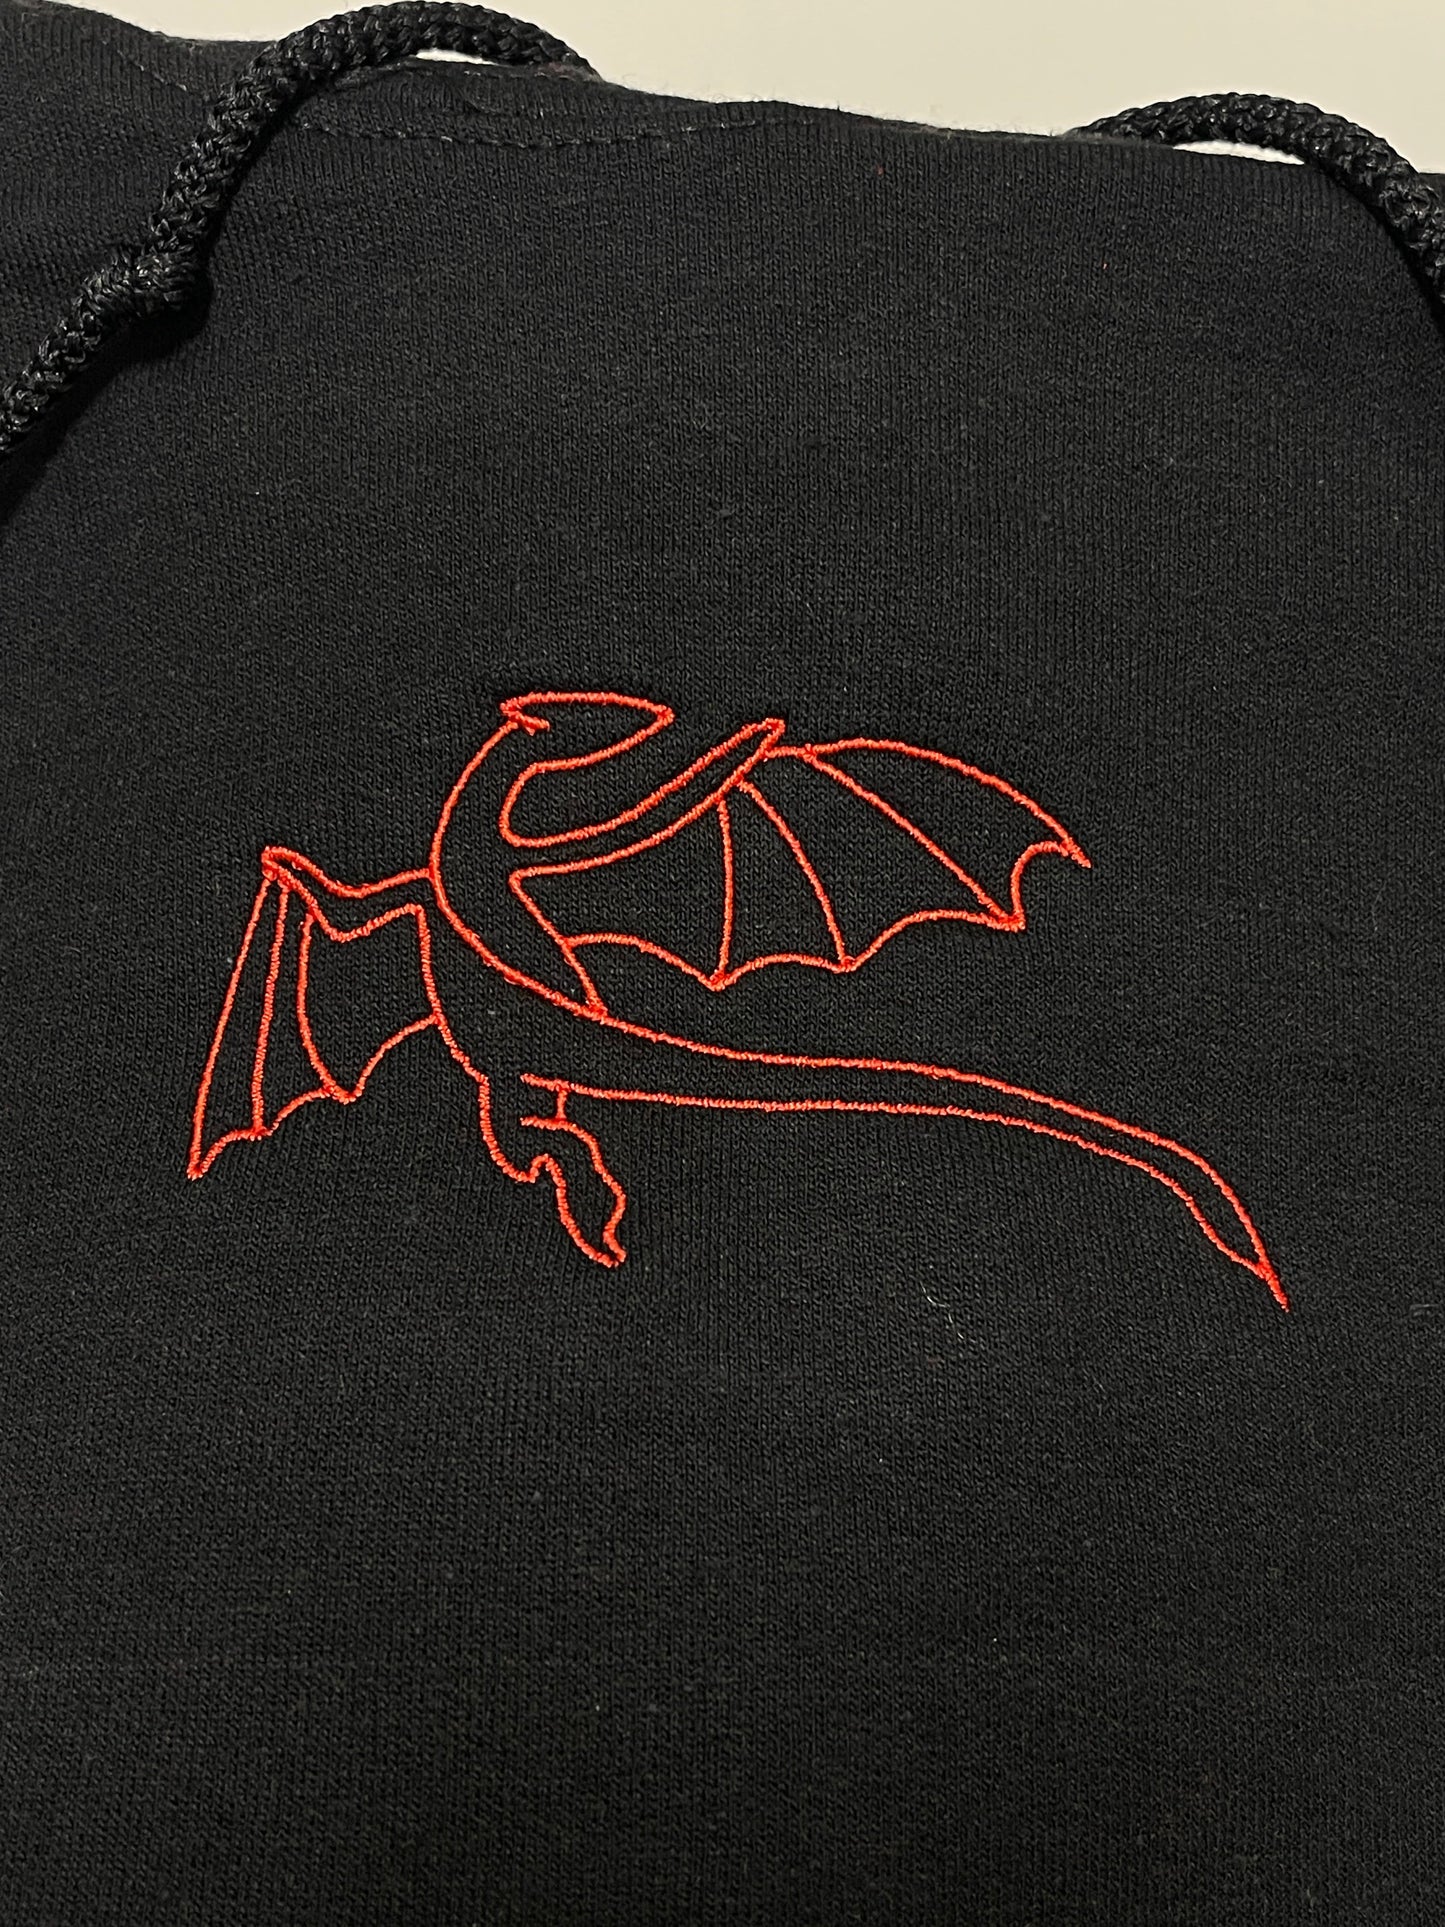 Right Facing Dragon Embroidery